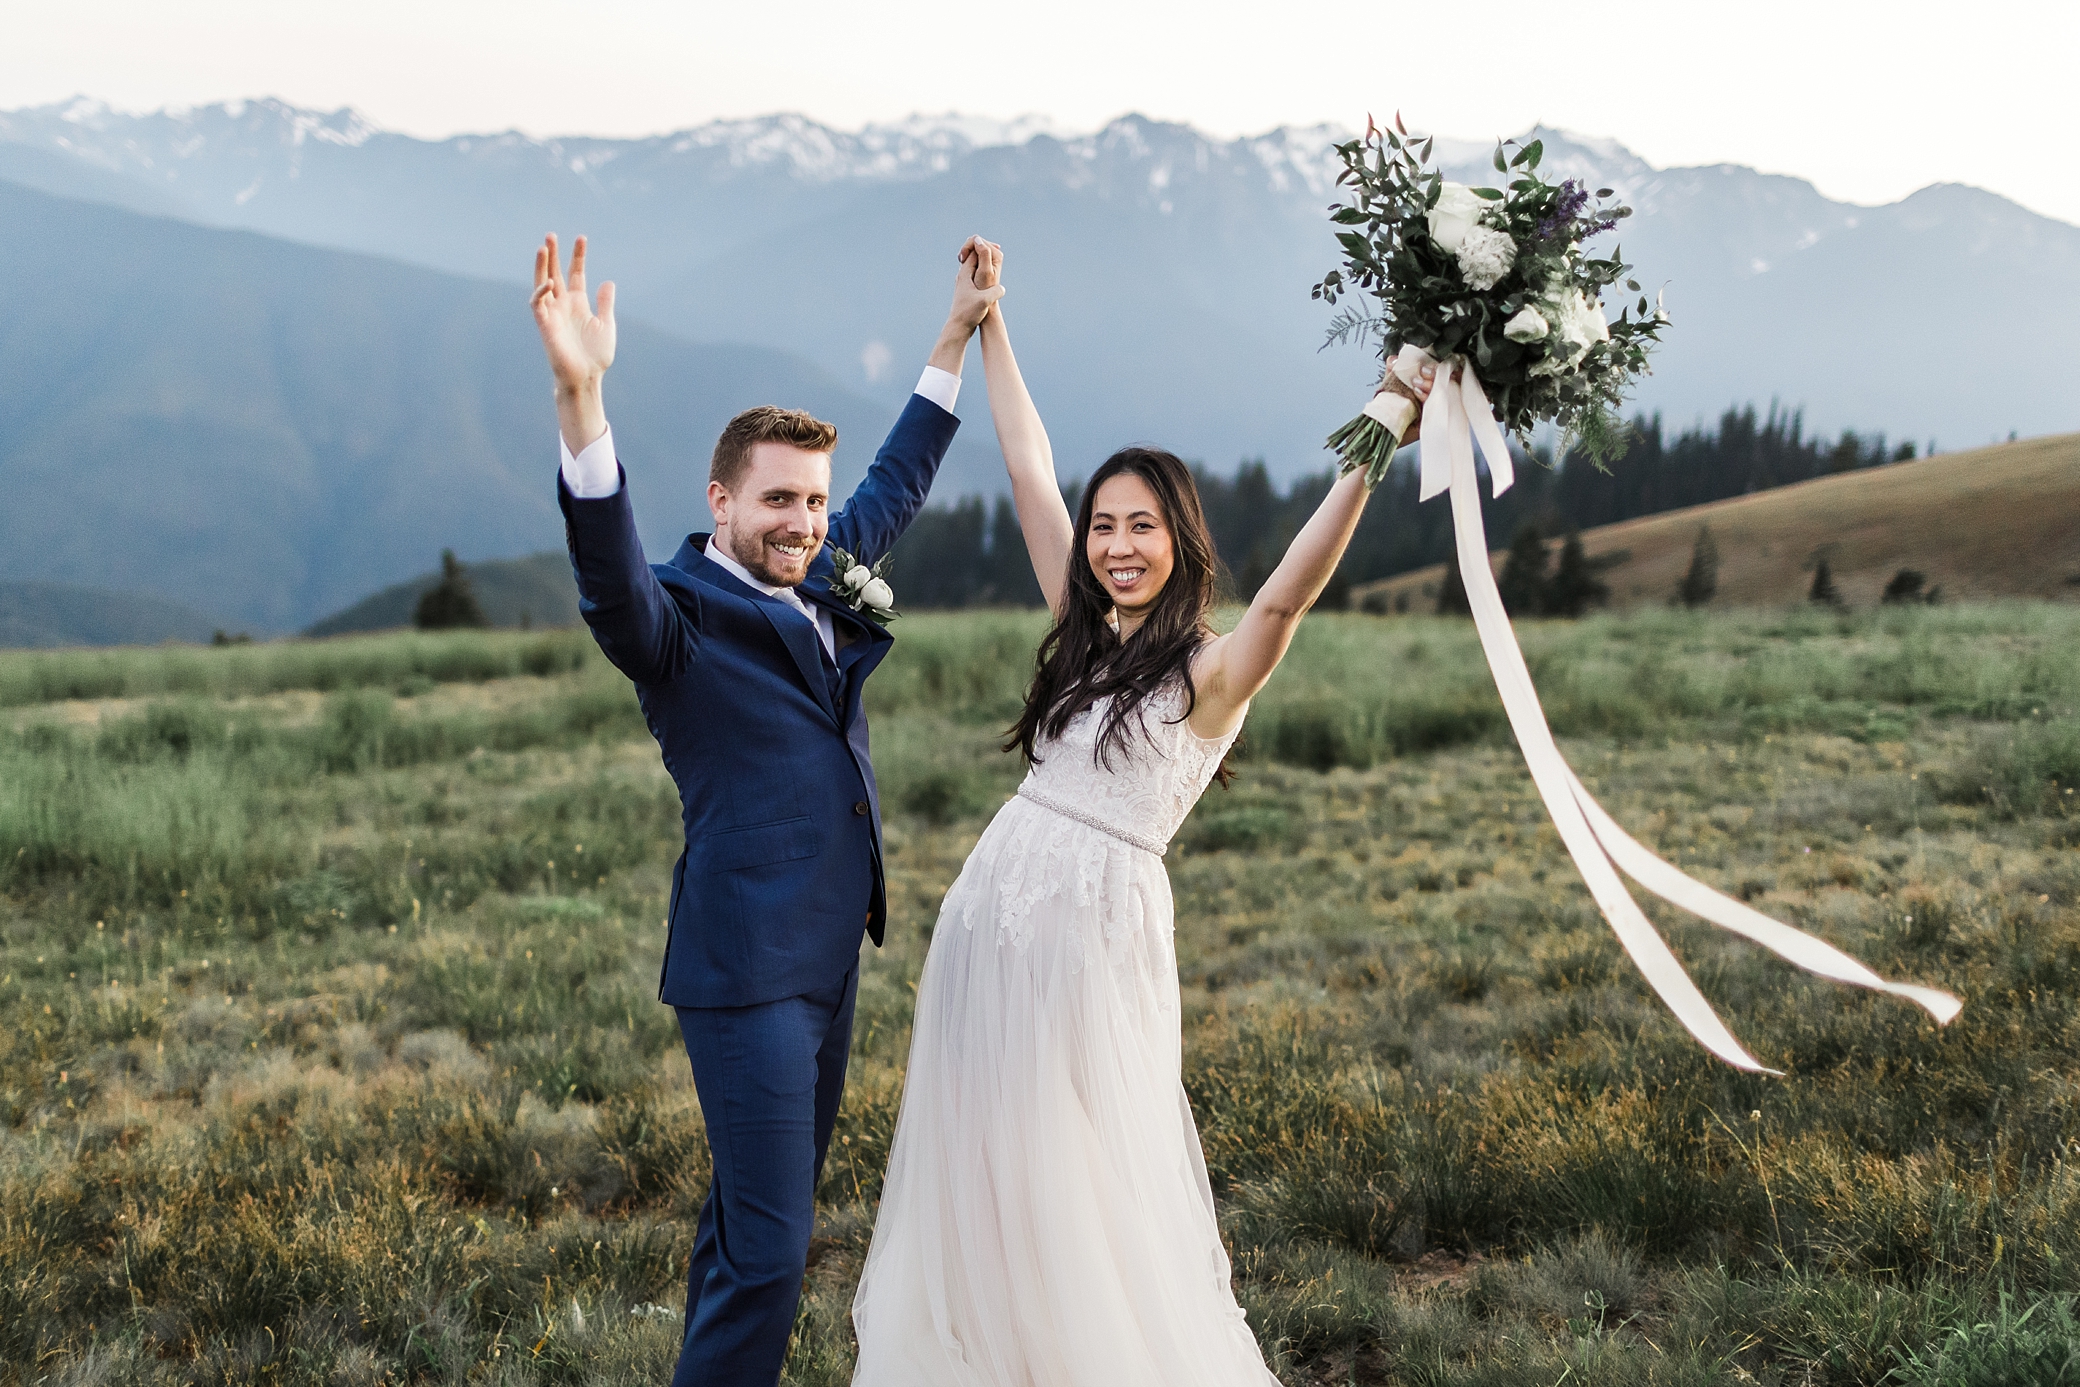 Adventure Elopement with views of Hurricane Ridge in the Olympic National Park | Megan Montalvo Photography